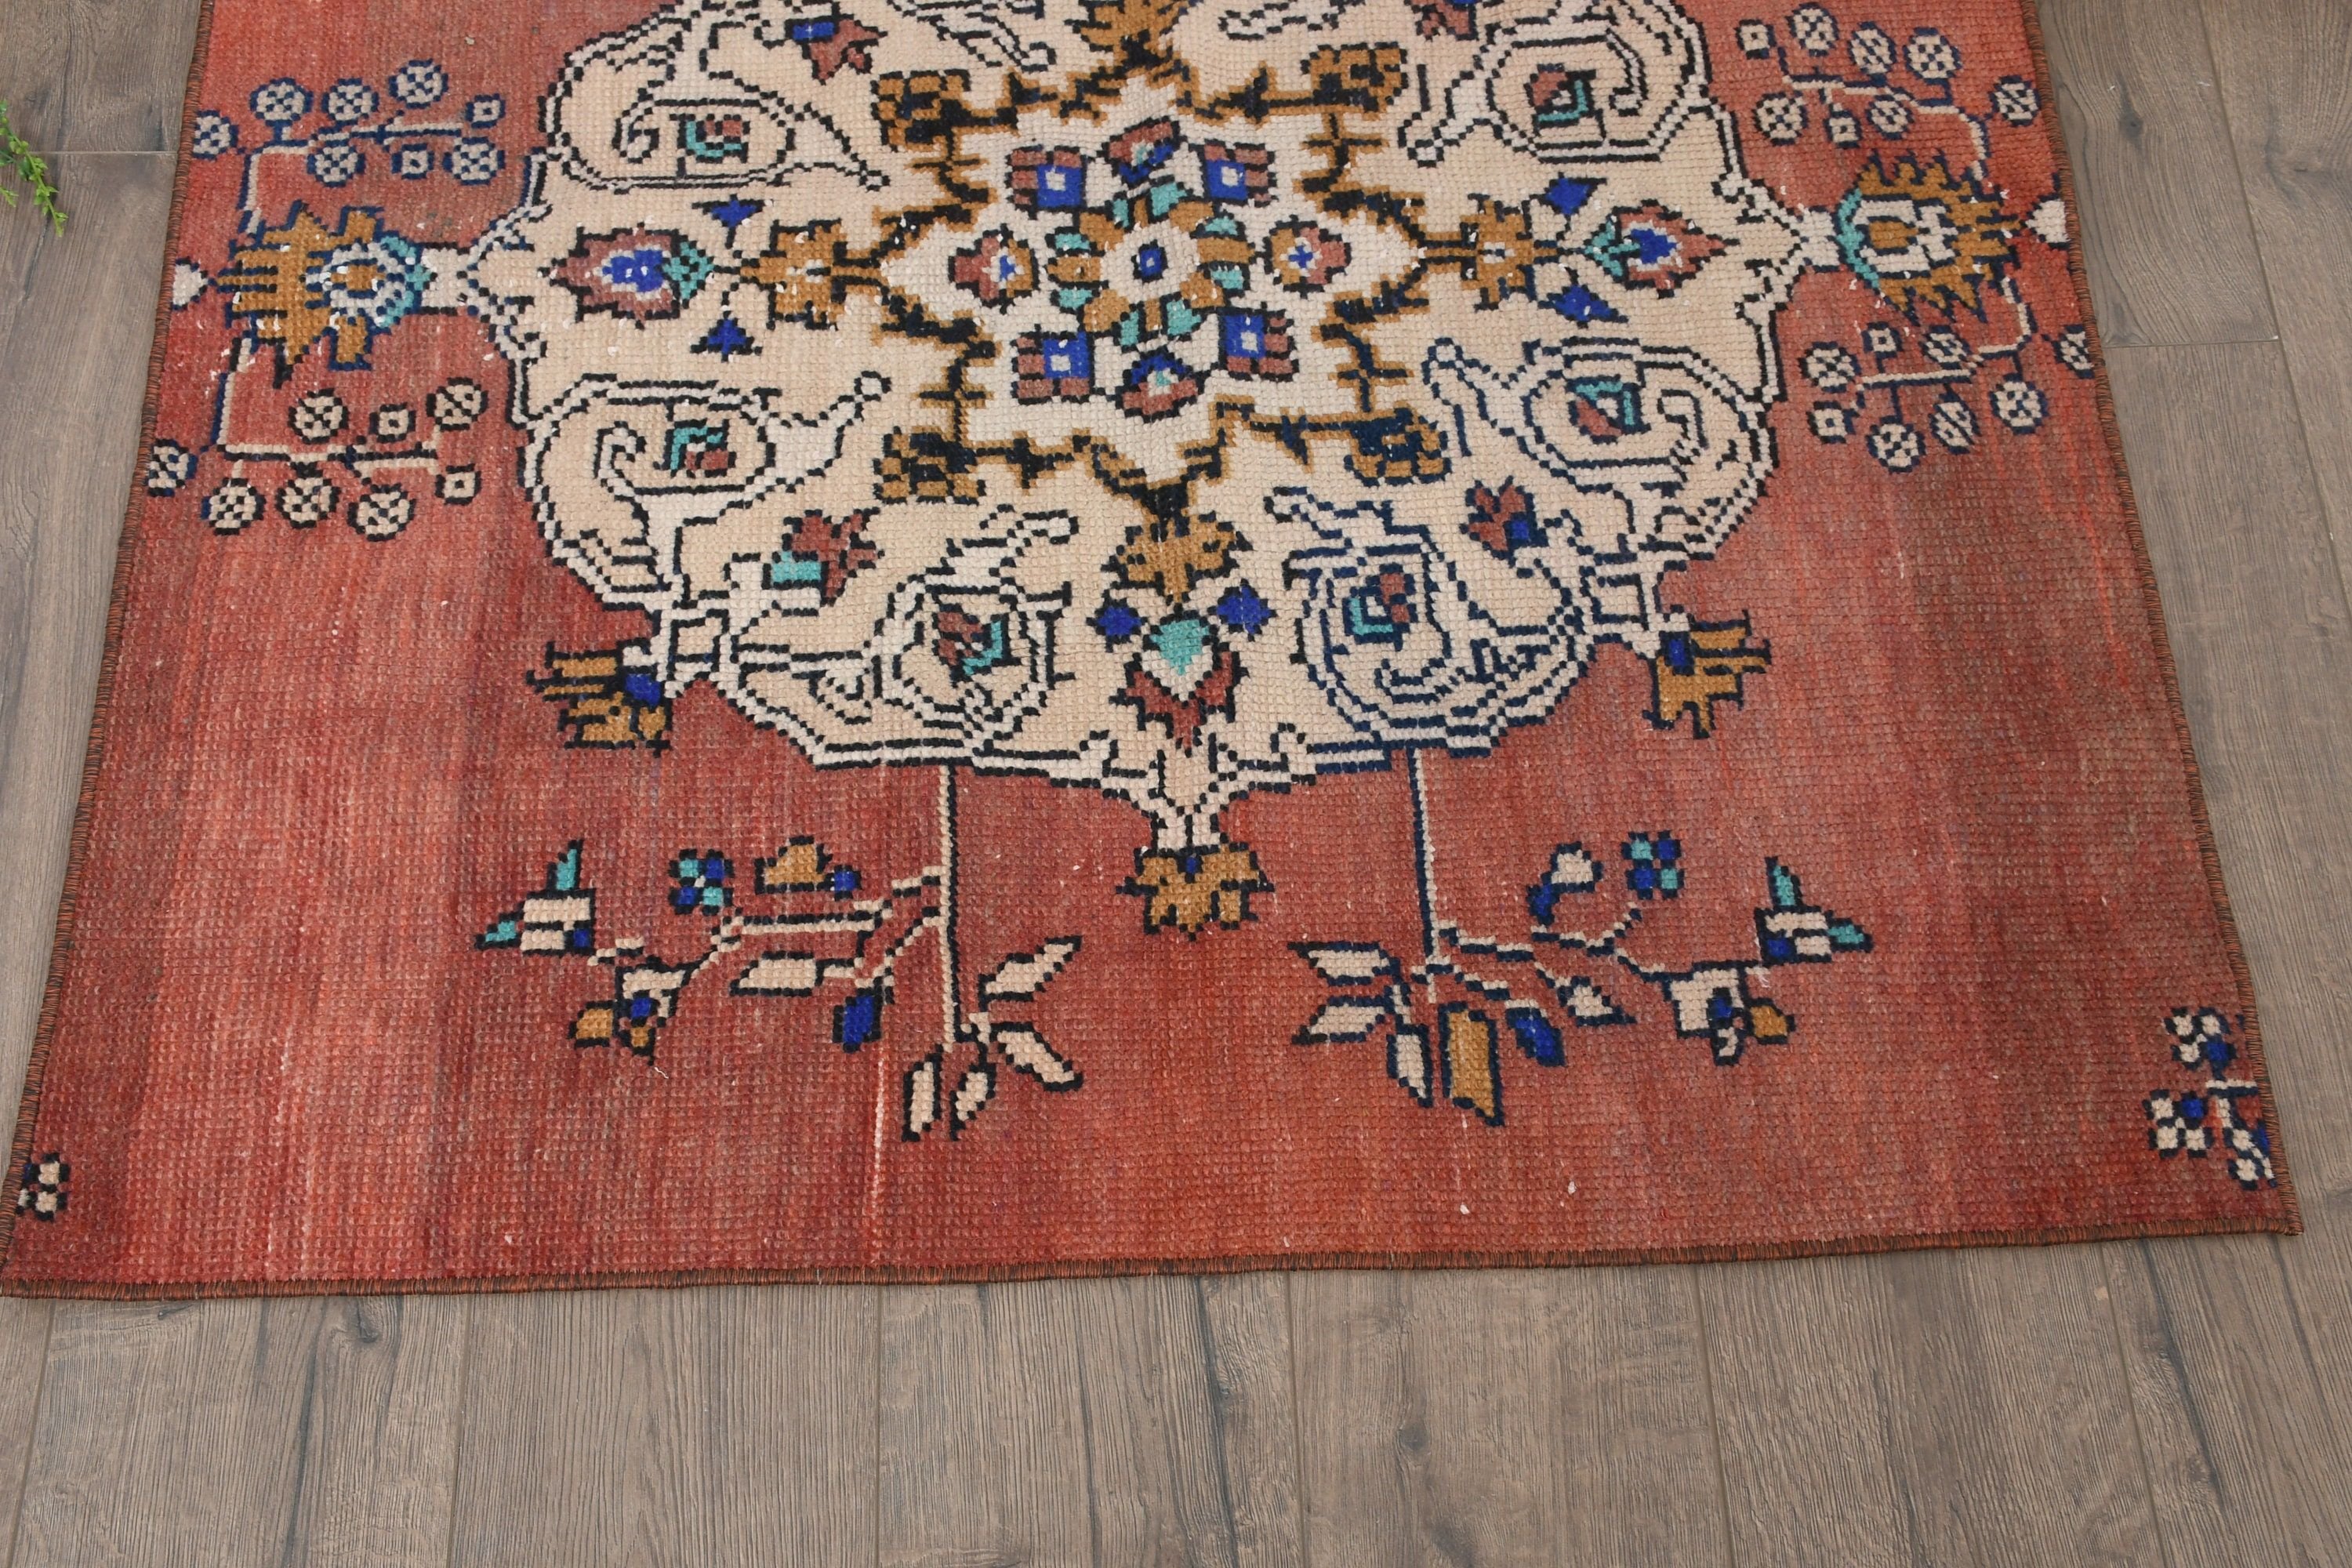 Floor Rugs, Beige  3.5x3.8 ft Small Rug, Turkish Rug, Entry Rugs, Oushak Rug, Rugs for Entry, Vintage Rug, Wall Hanging Rug